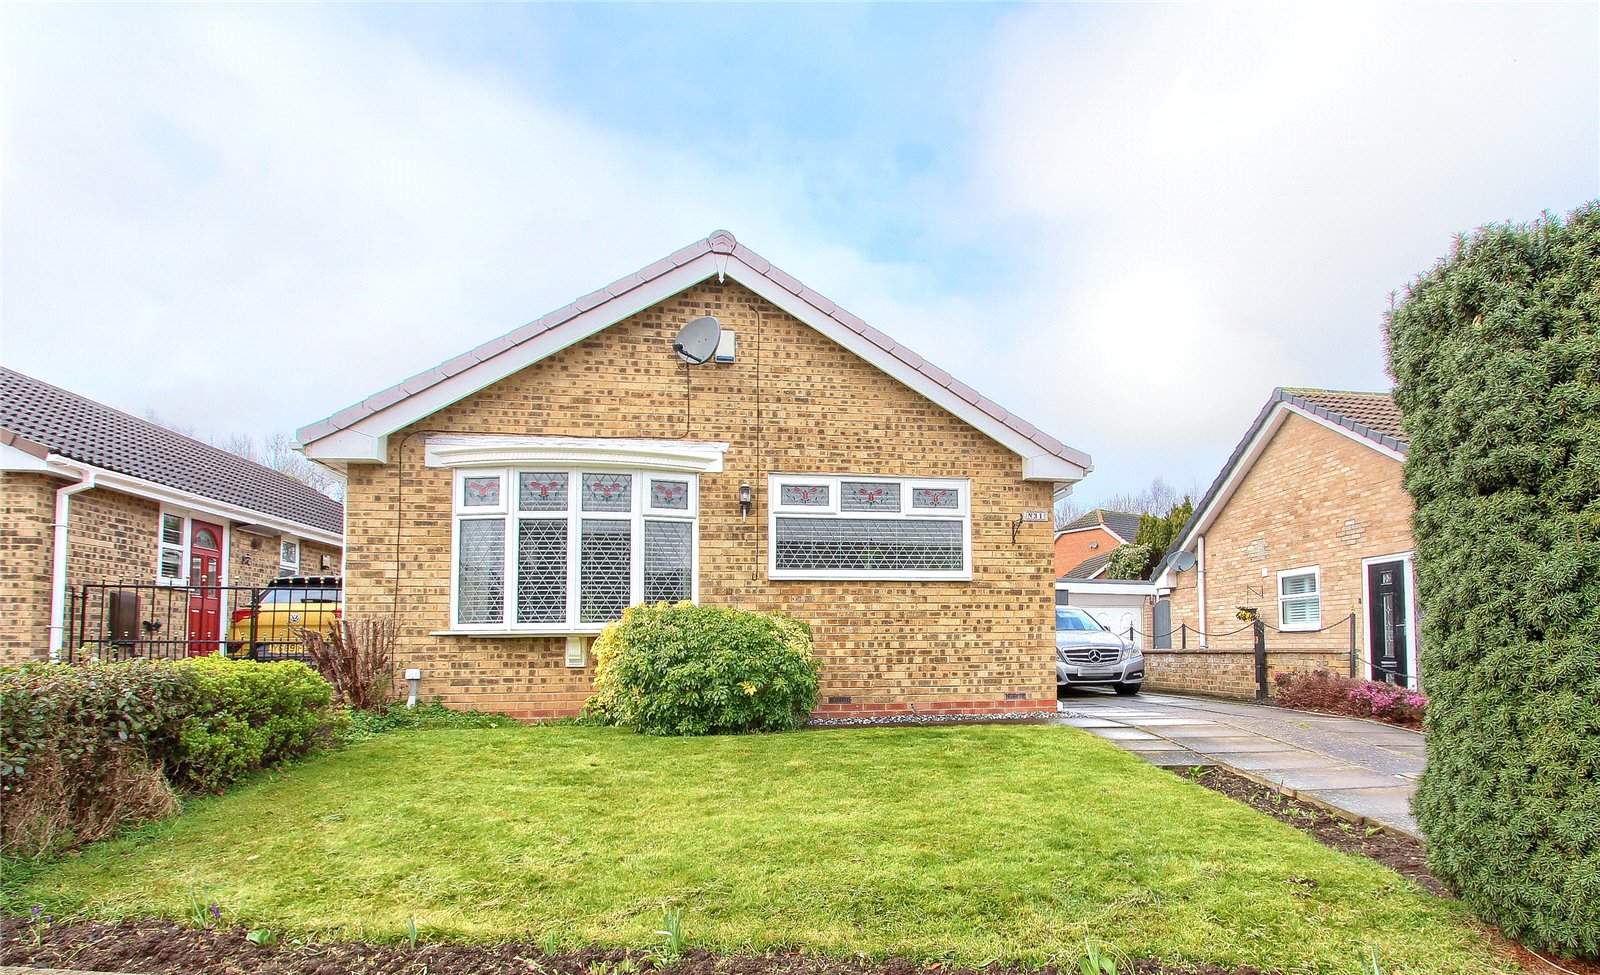 3 bed bungalow for sale in Bowes Road, The Greenway 1